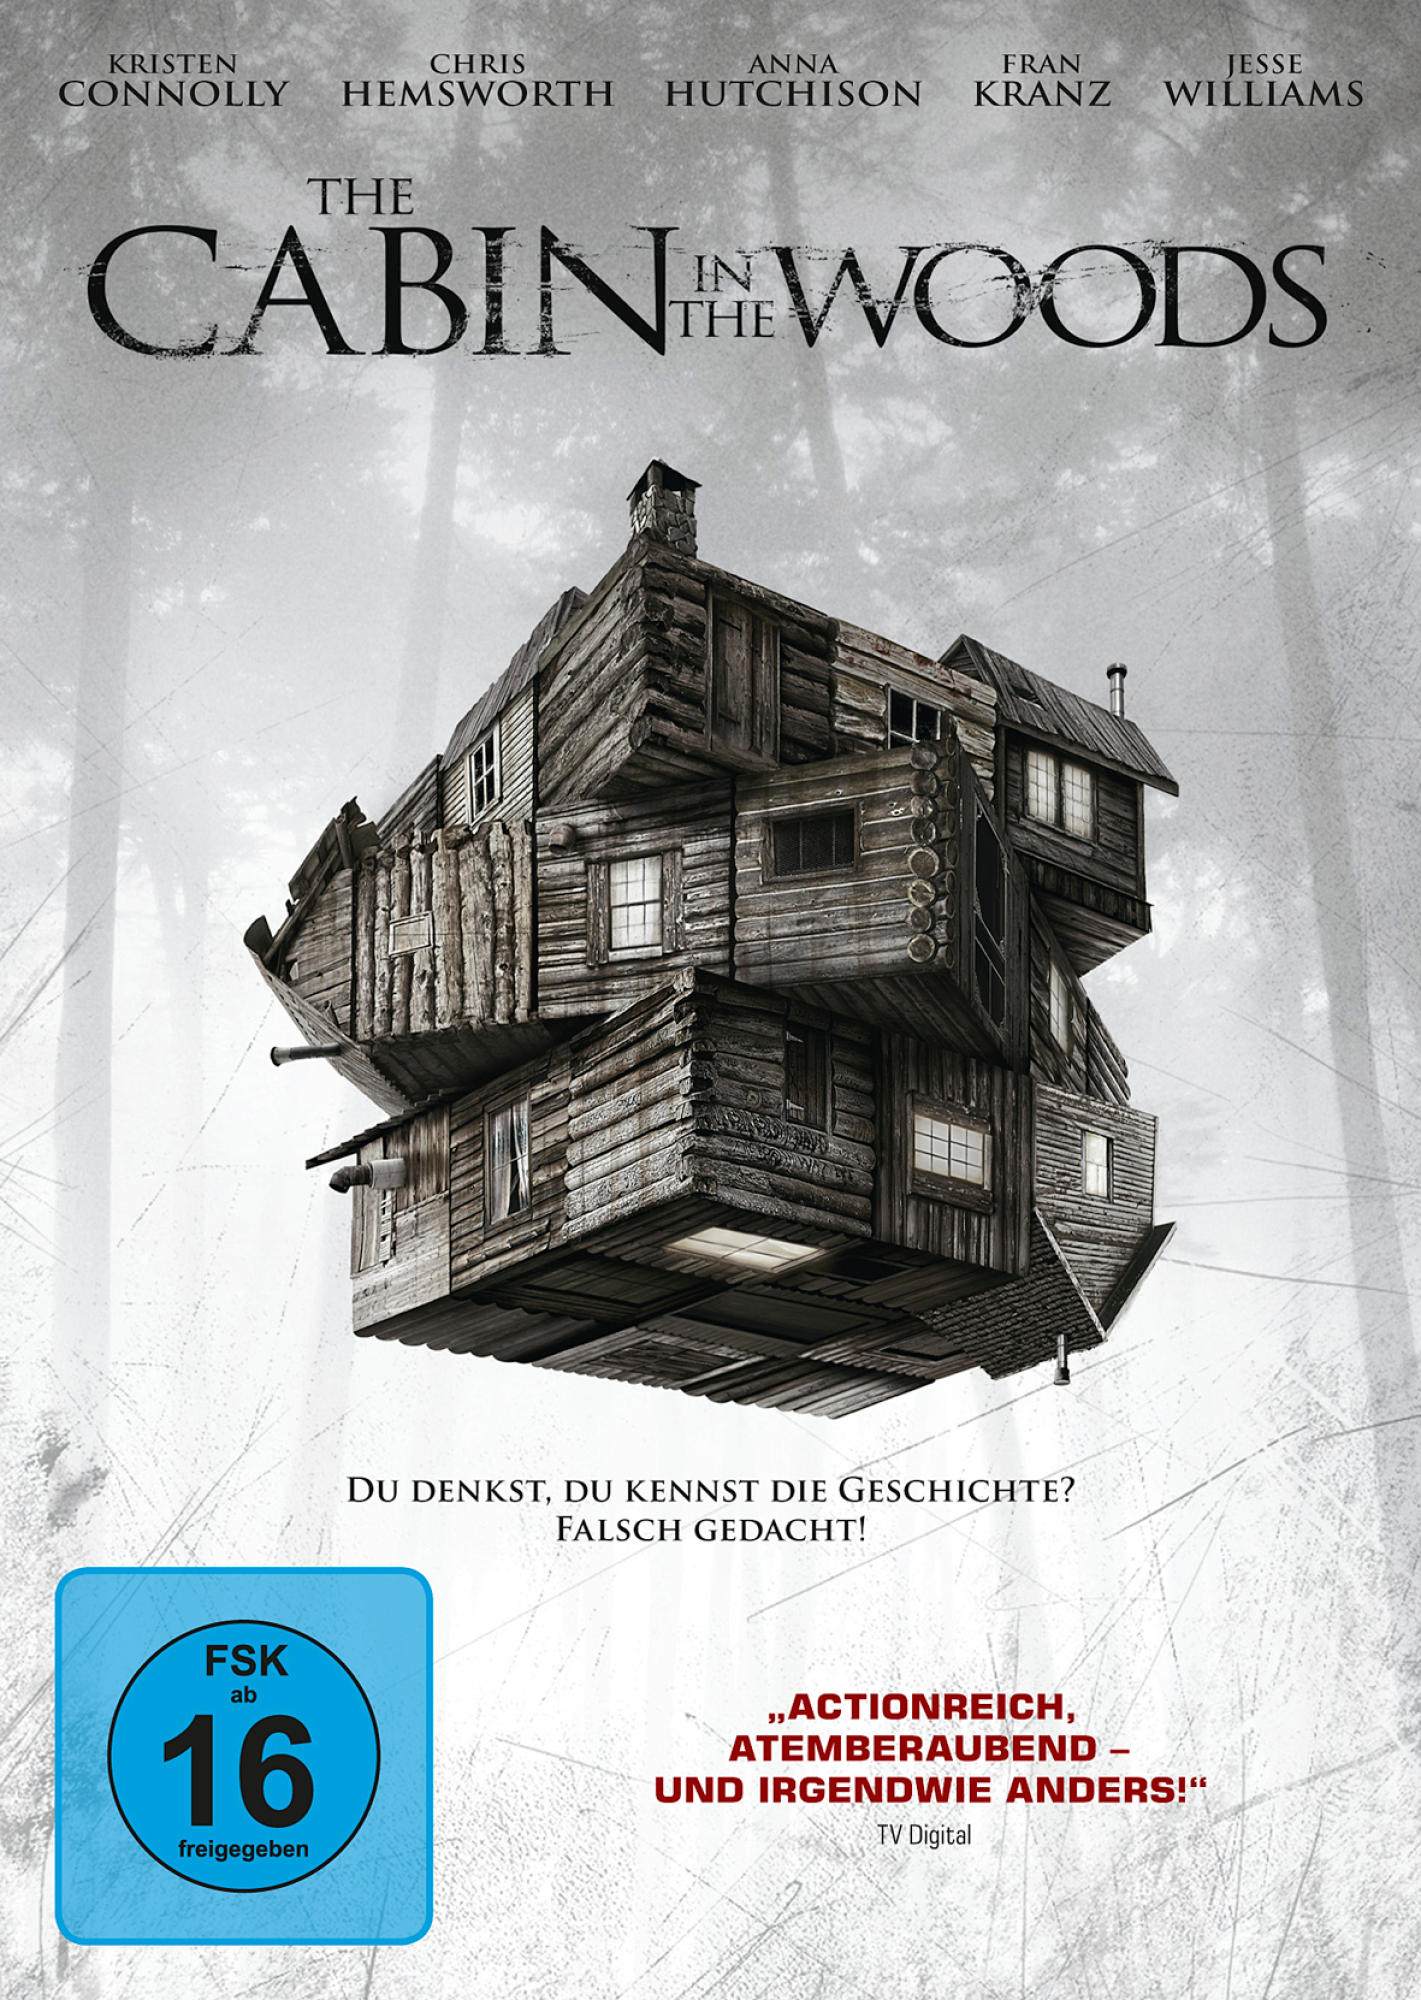 Woods The DVD in the Cabin